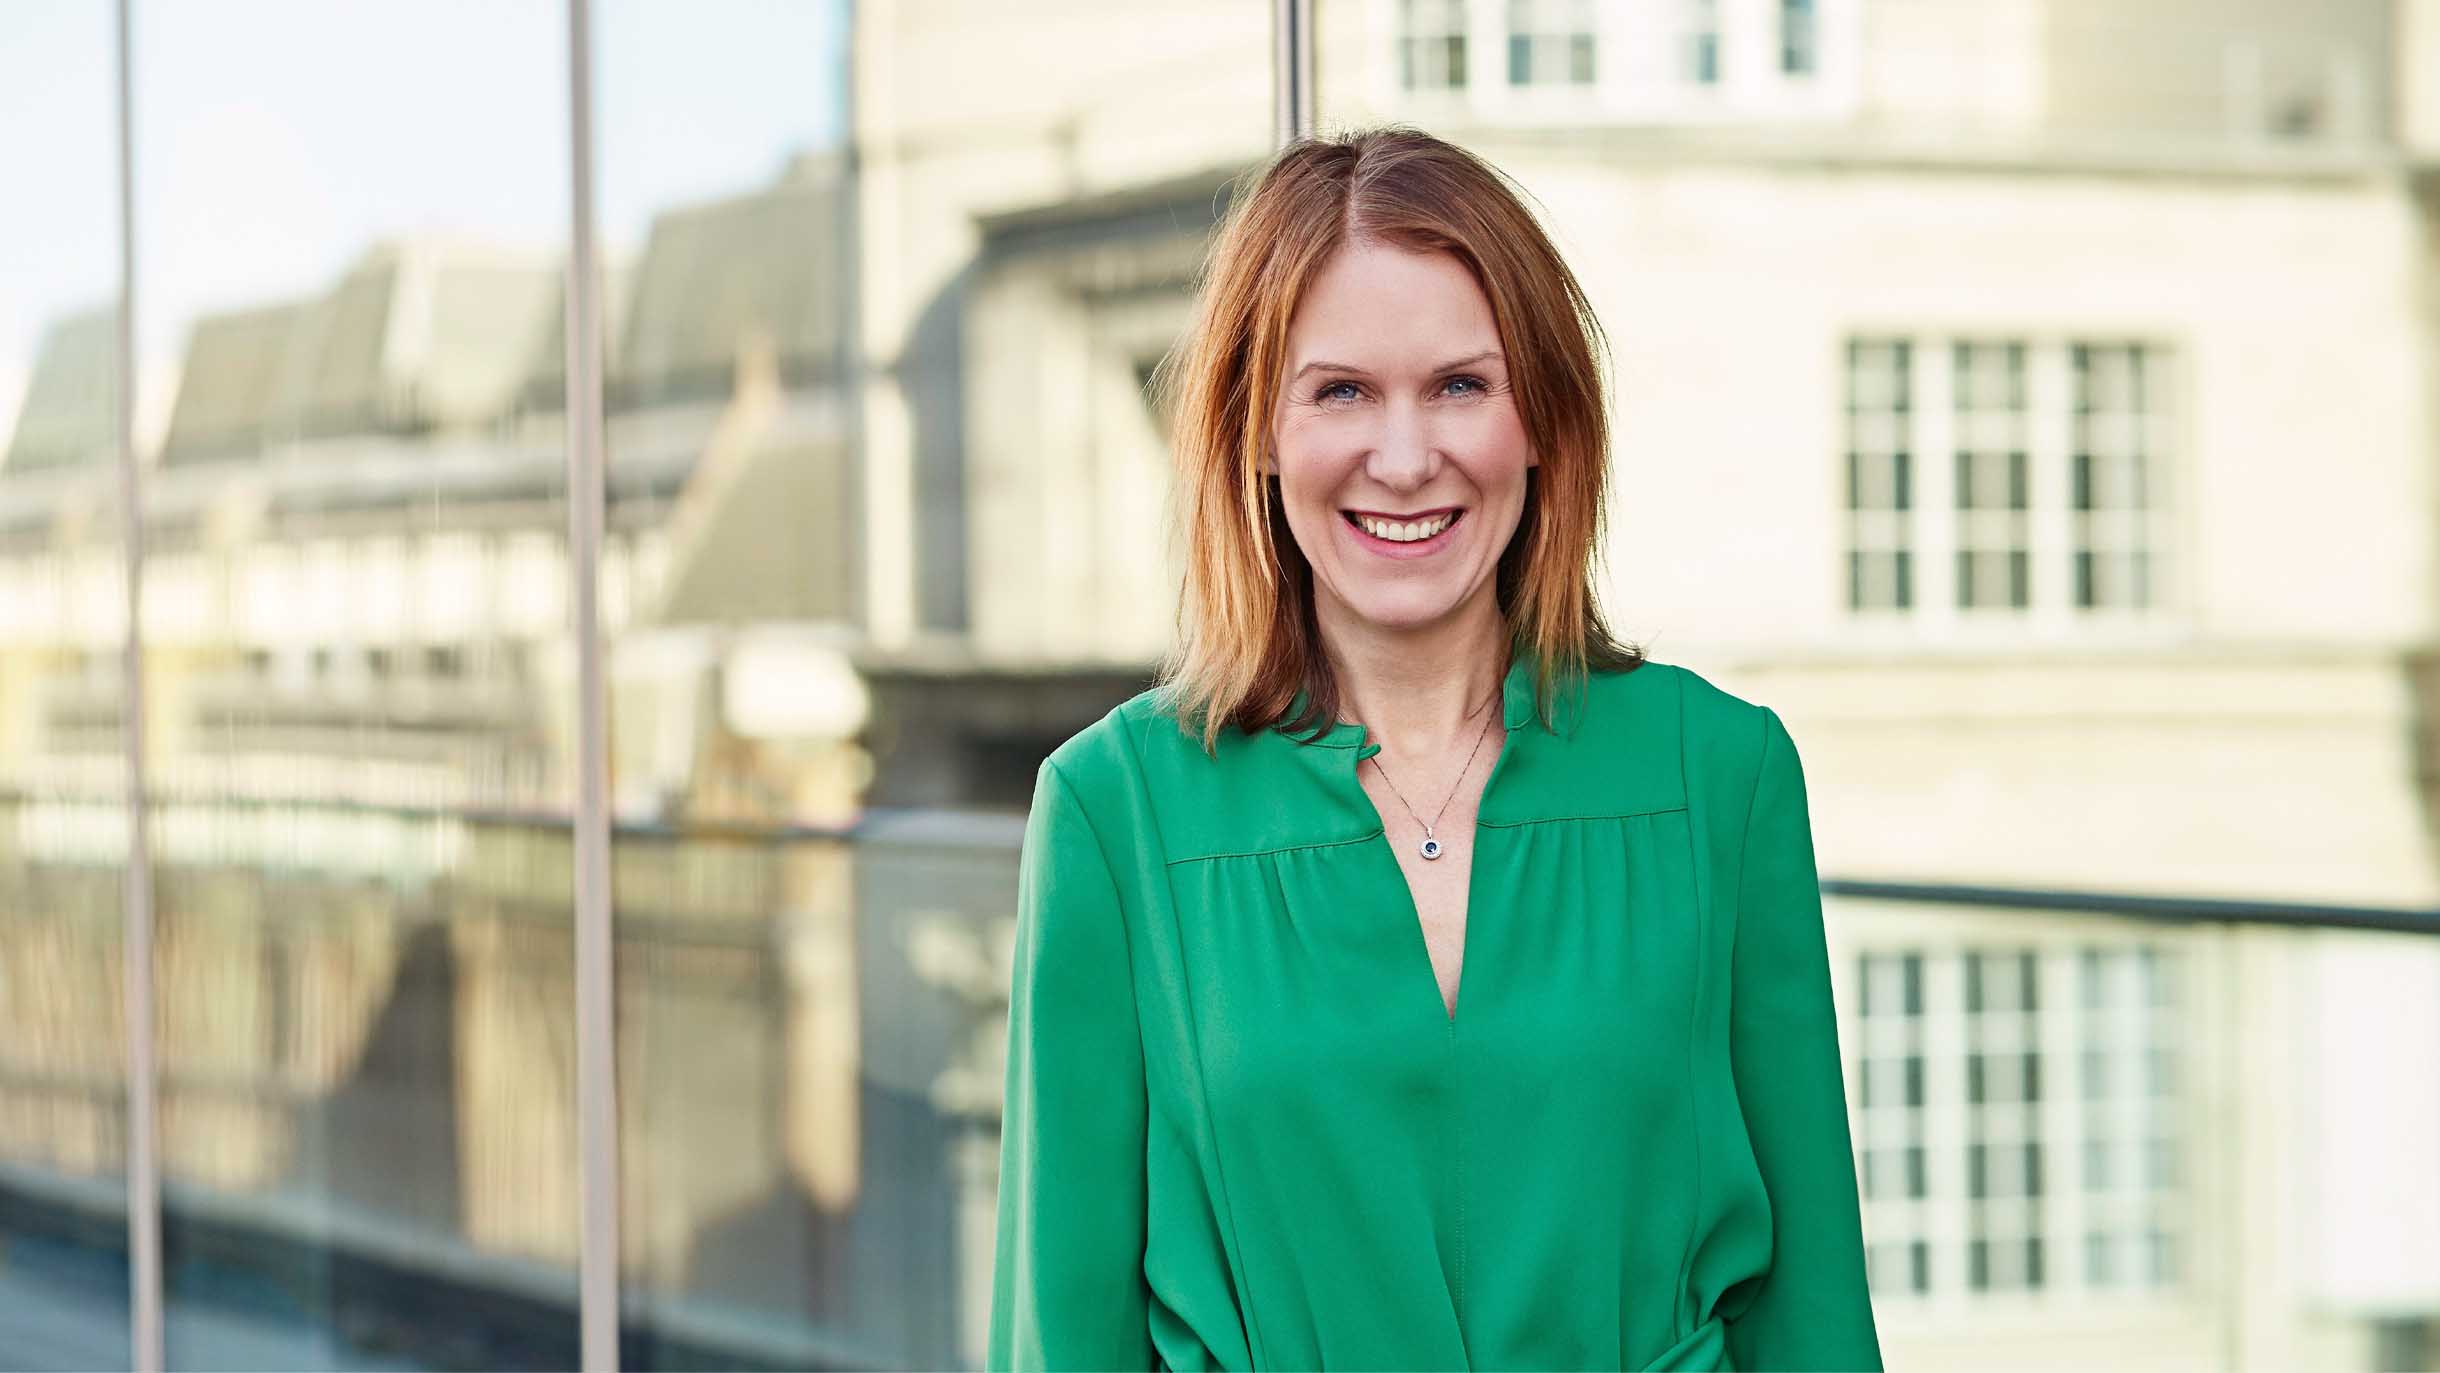 In the spotlight: Ruth Handcock, Chair of Seccl and CEO of Octopus Investments